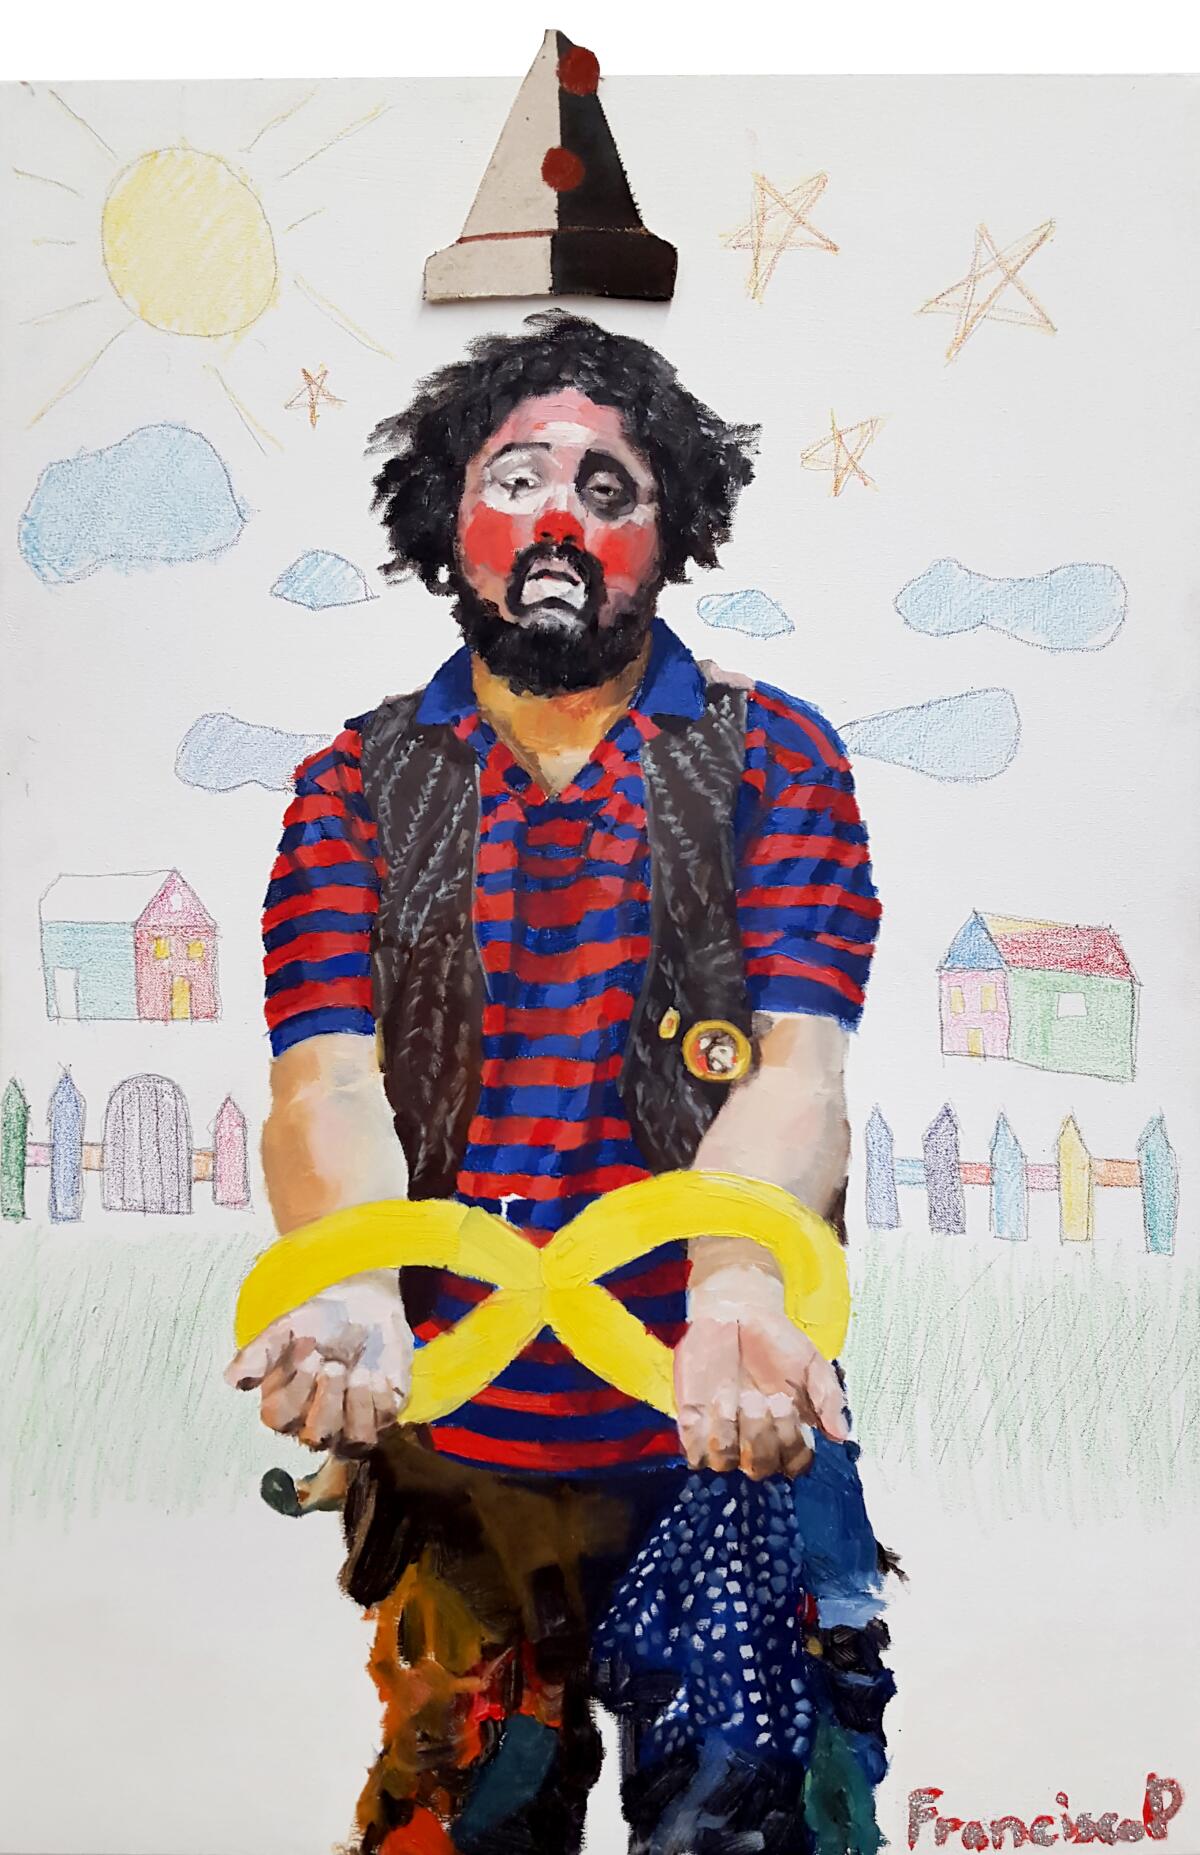 "Loco Coco Trapped in Reality," a painting of a man with clown makeup and hands bound, on a background of childish drawings.